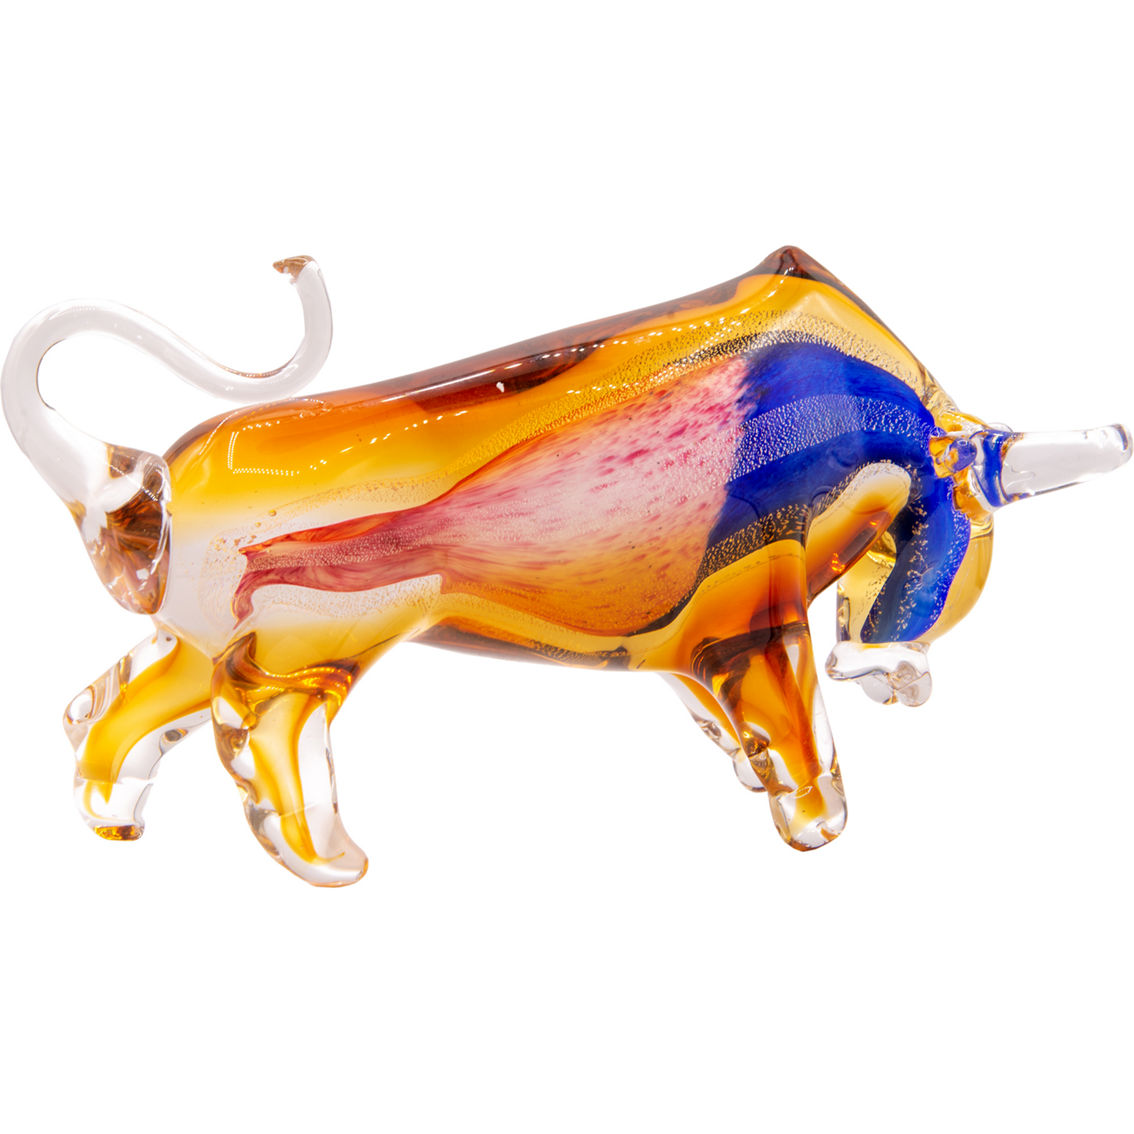 Dale Tiffany Rave Bull Handcrafted Art Glass Figurine - Image 4 of 6